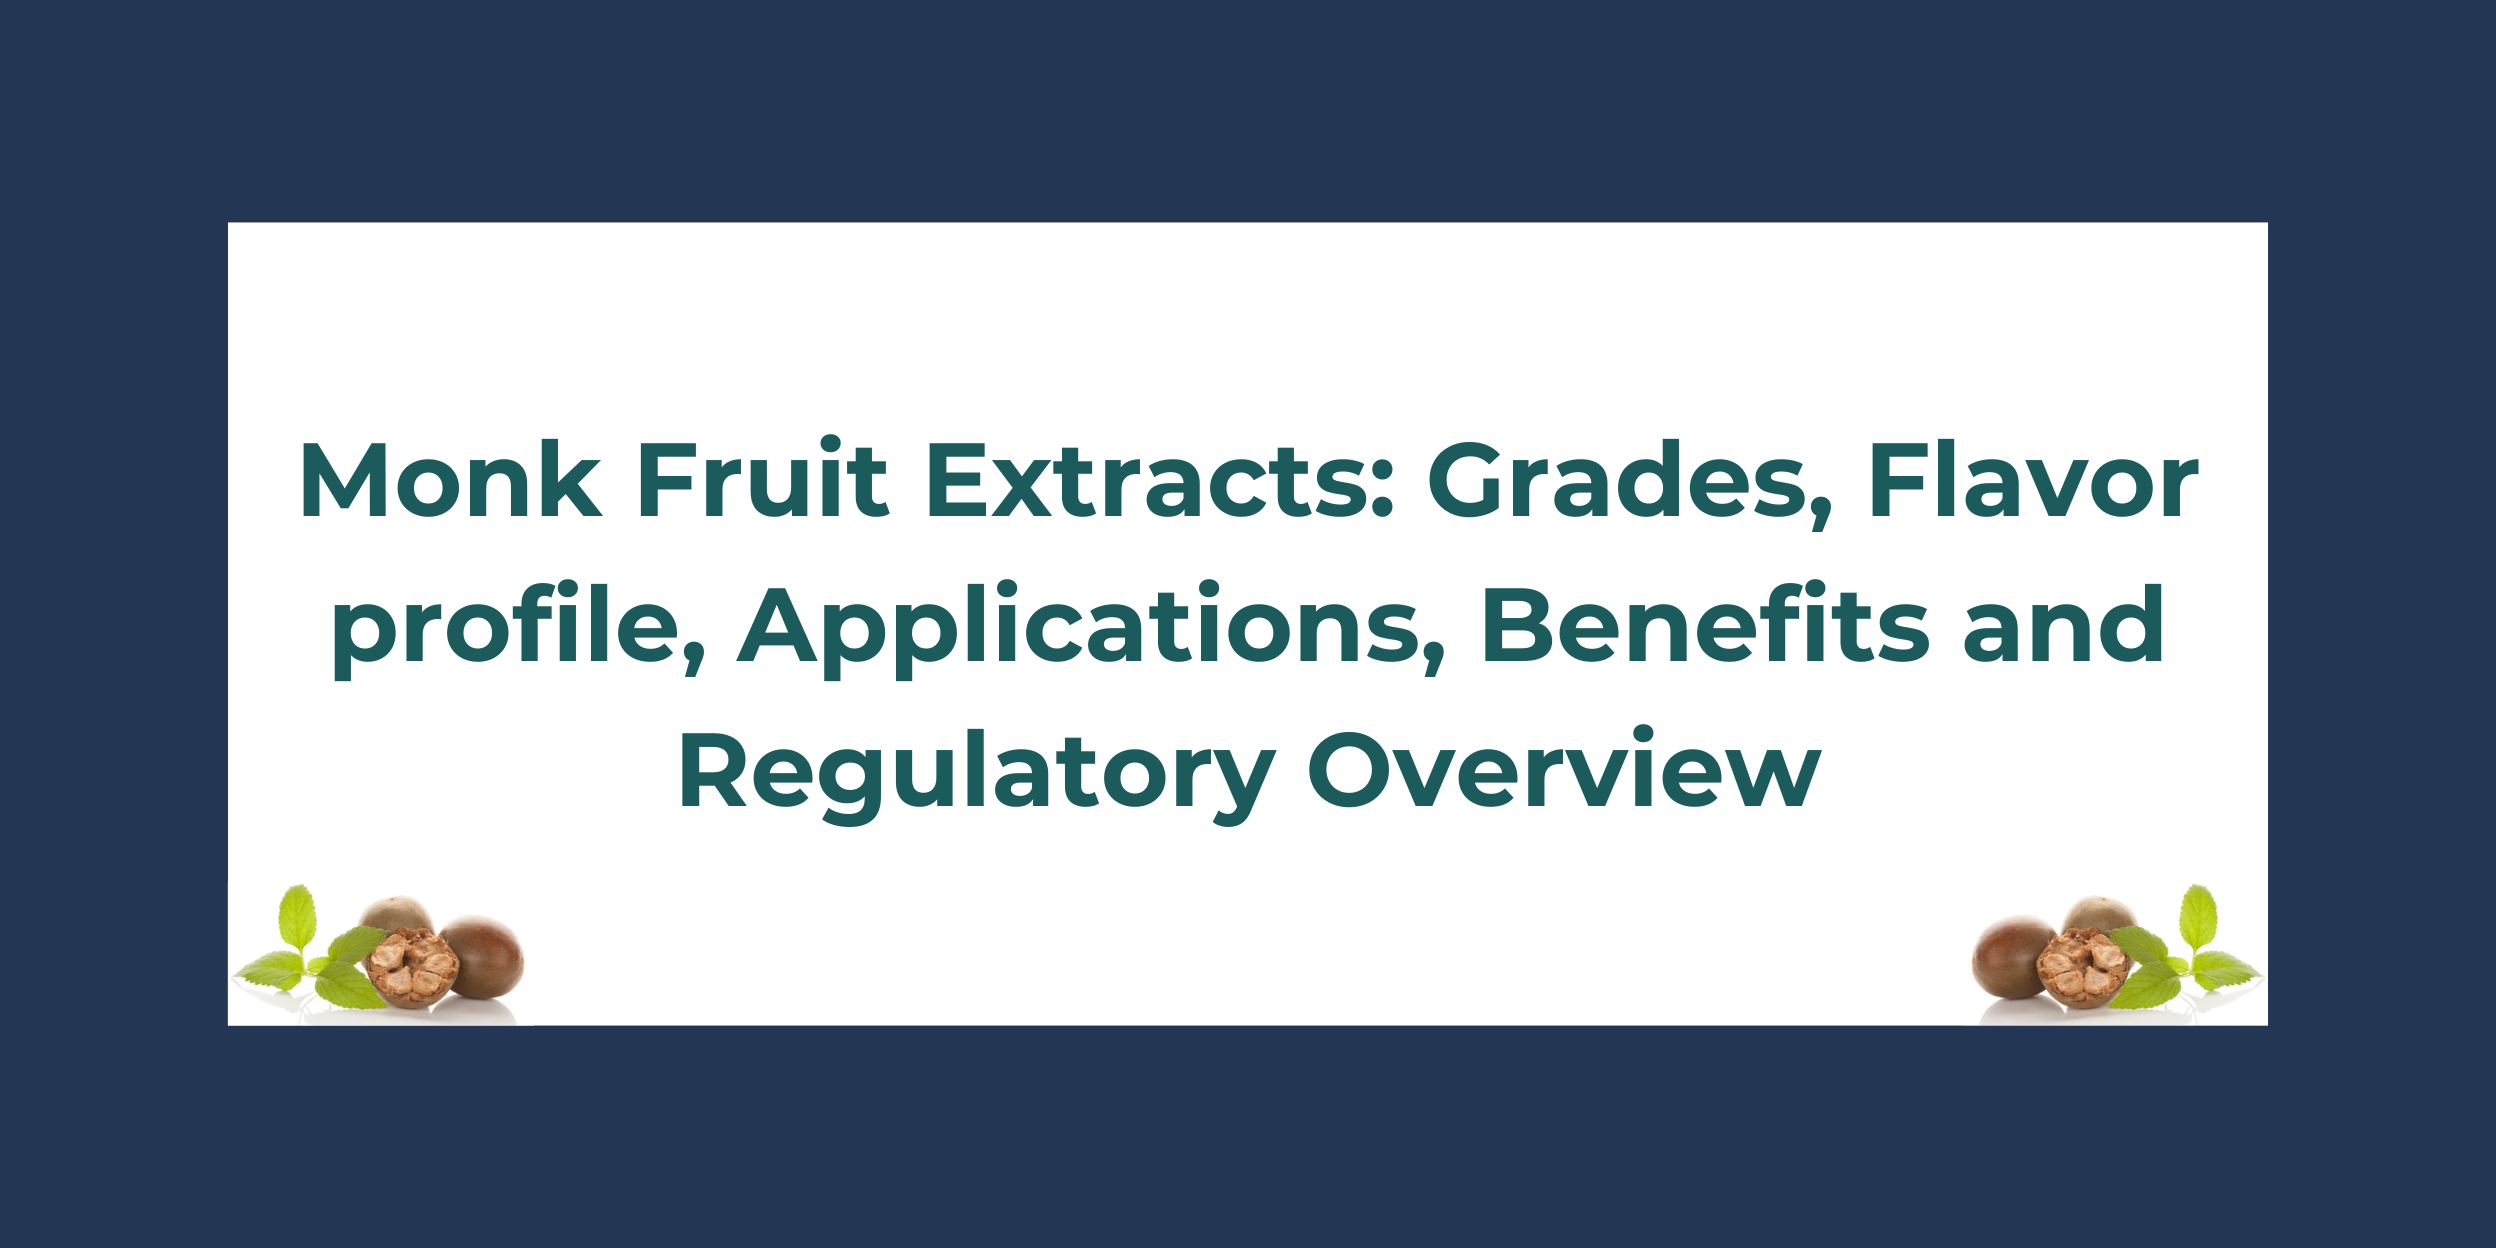 Monk Fruit Extracts: Grades, Flavor profile, Applications, Benefits and Regulatory Overview